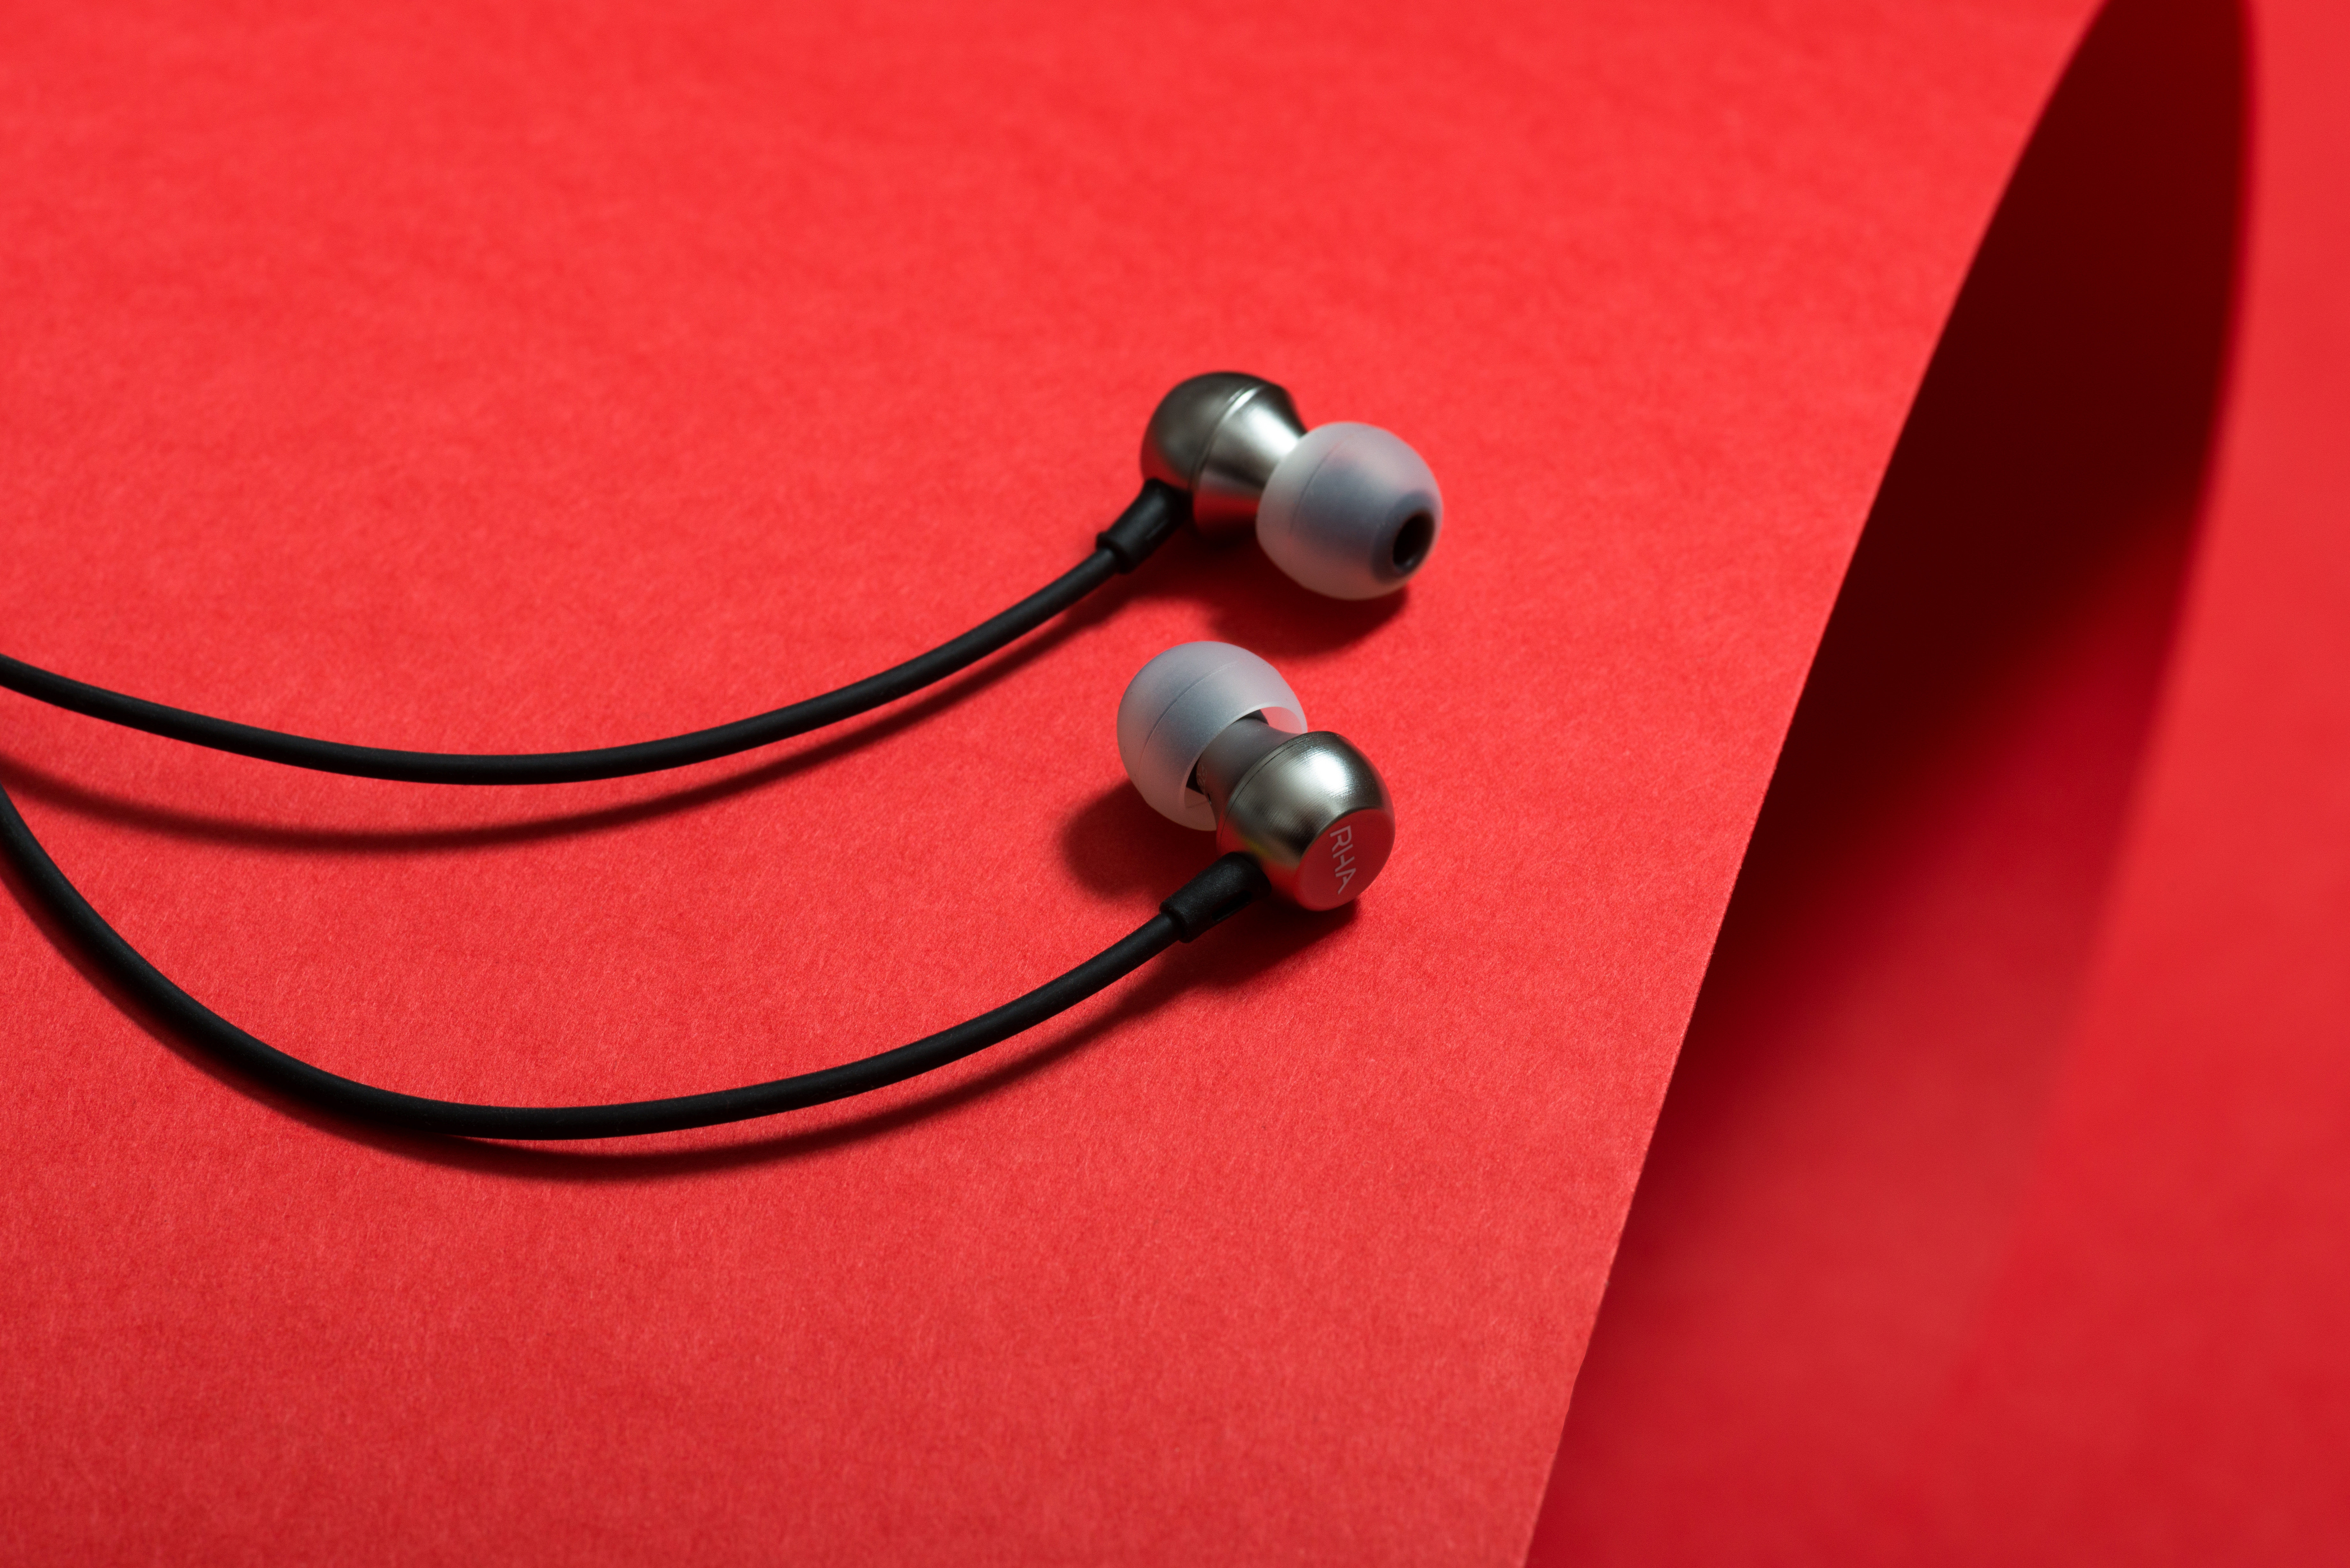 RHA MA390 Wireless announcement: A close-up of the earbuds on a red background.